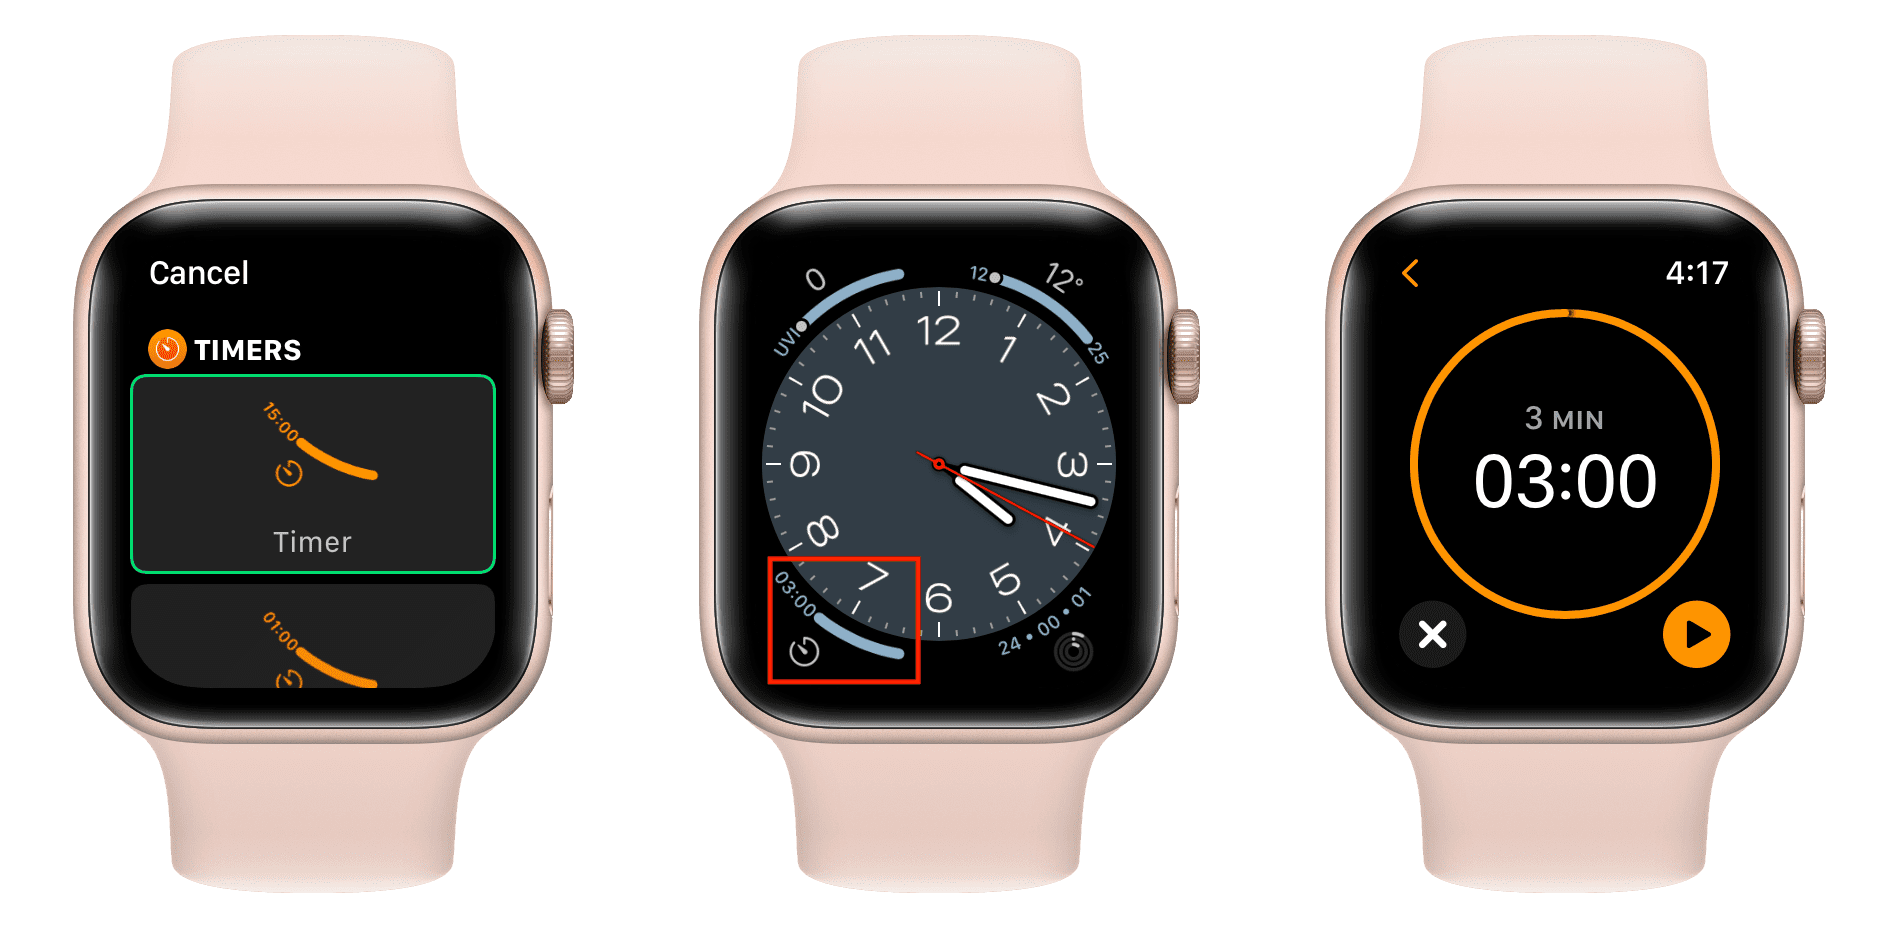 Timer app complication on Apple Watch